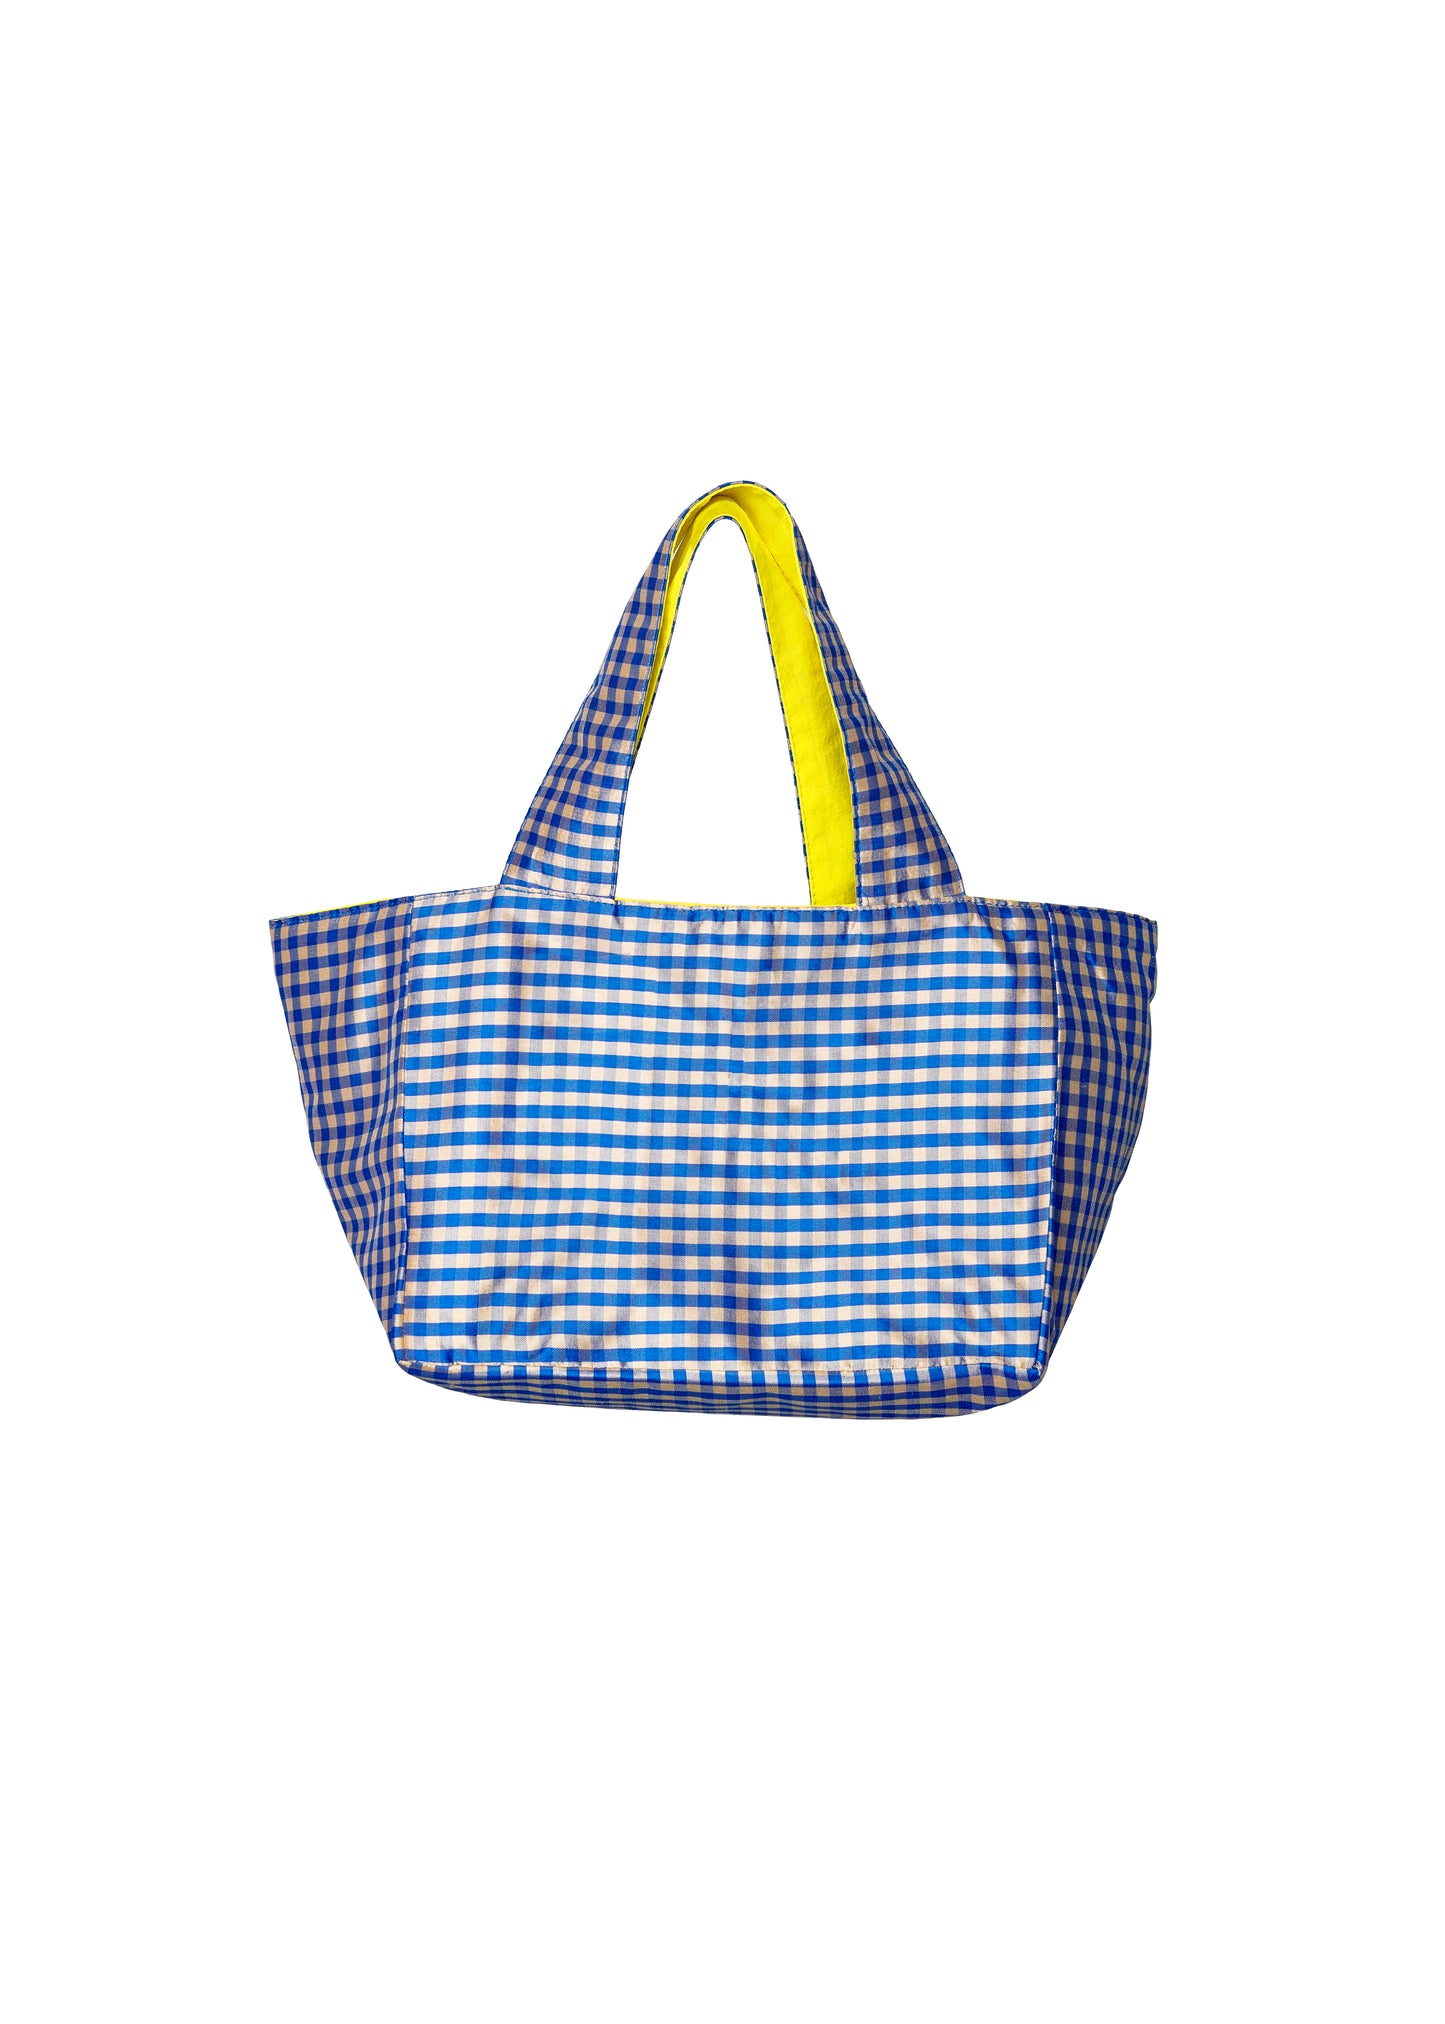 REVERSIBLE GINGHAM BLUE CREAM / HOT YELLOW MINI TOTE – COMING OF AGE